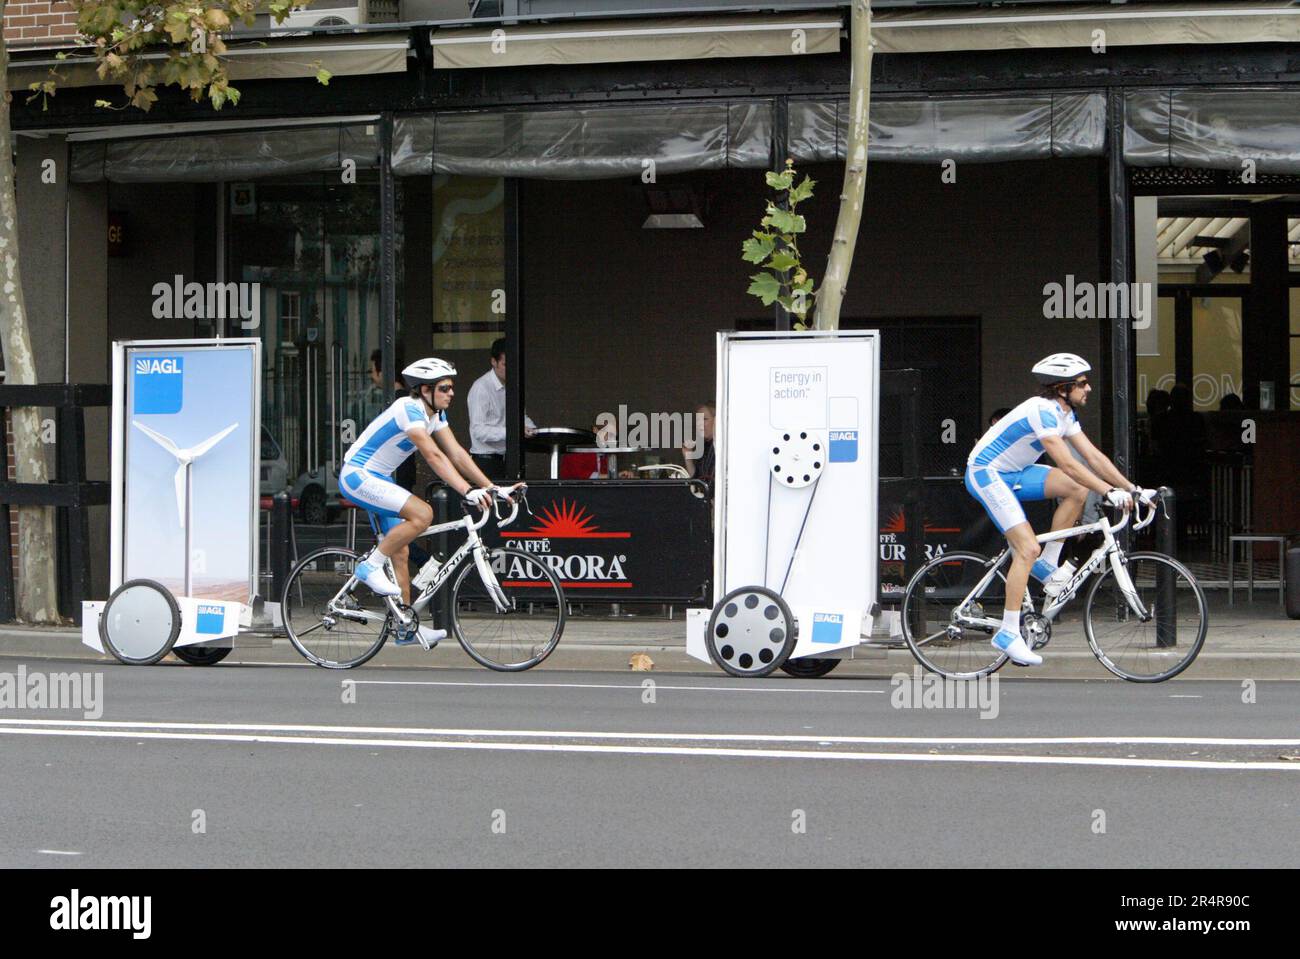 Moving advertising displayed on bicycles in Woolloomooloo in Sydney, Australia. Stock Photo